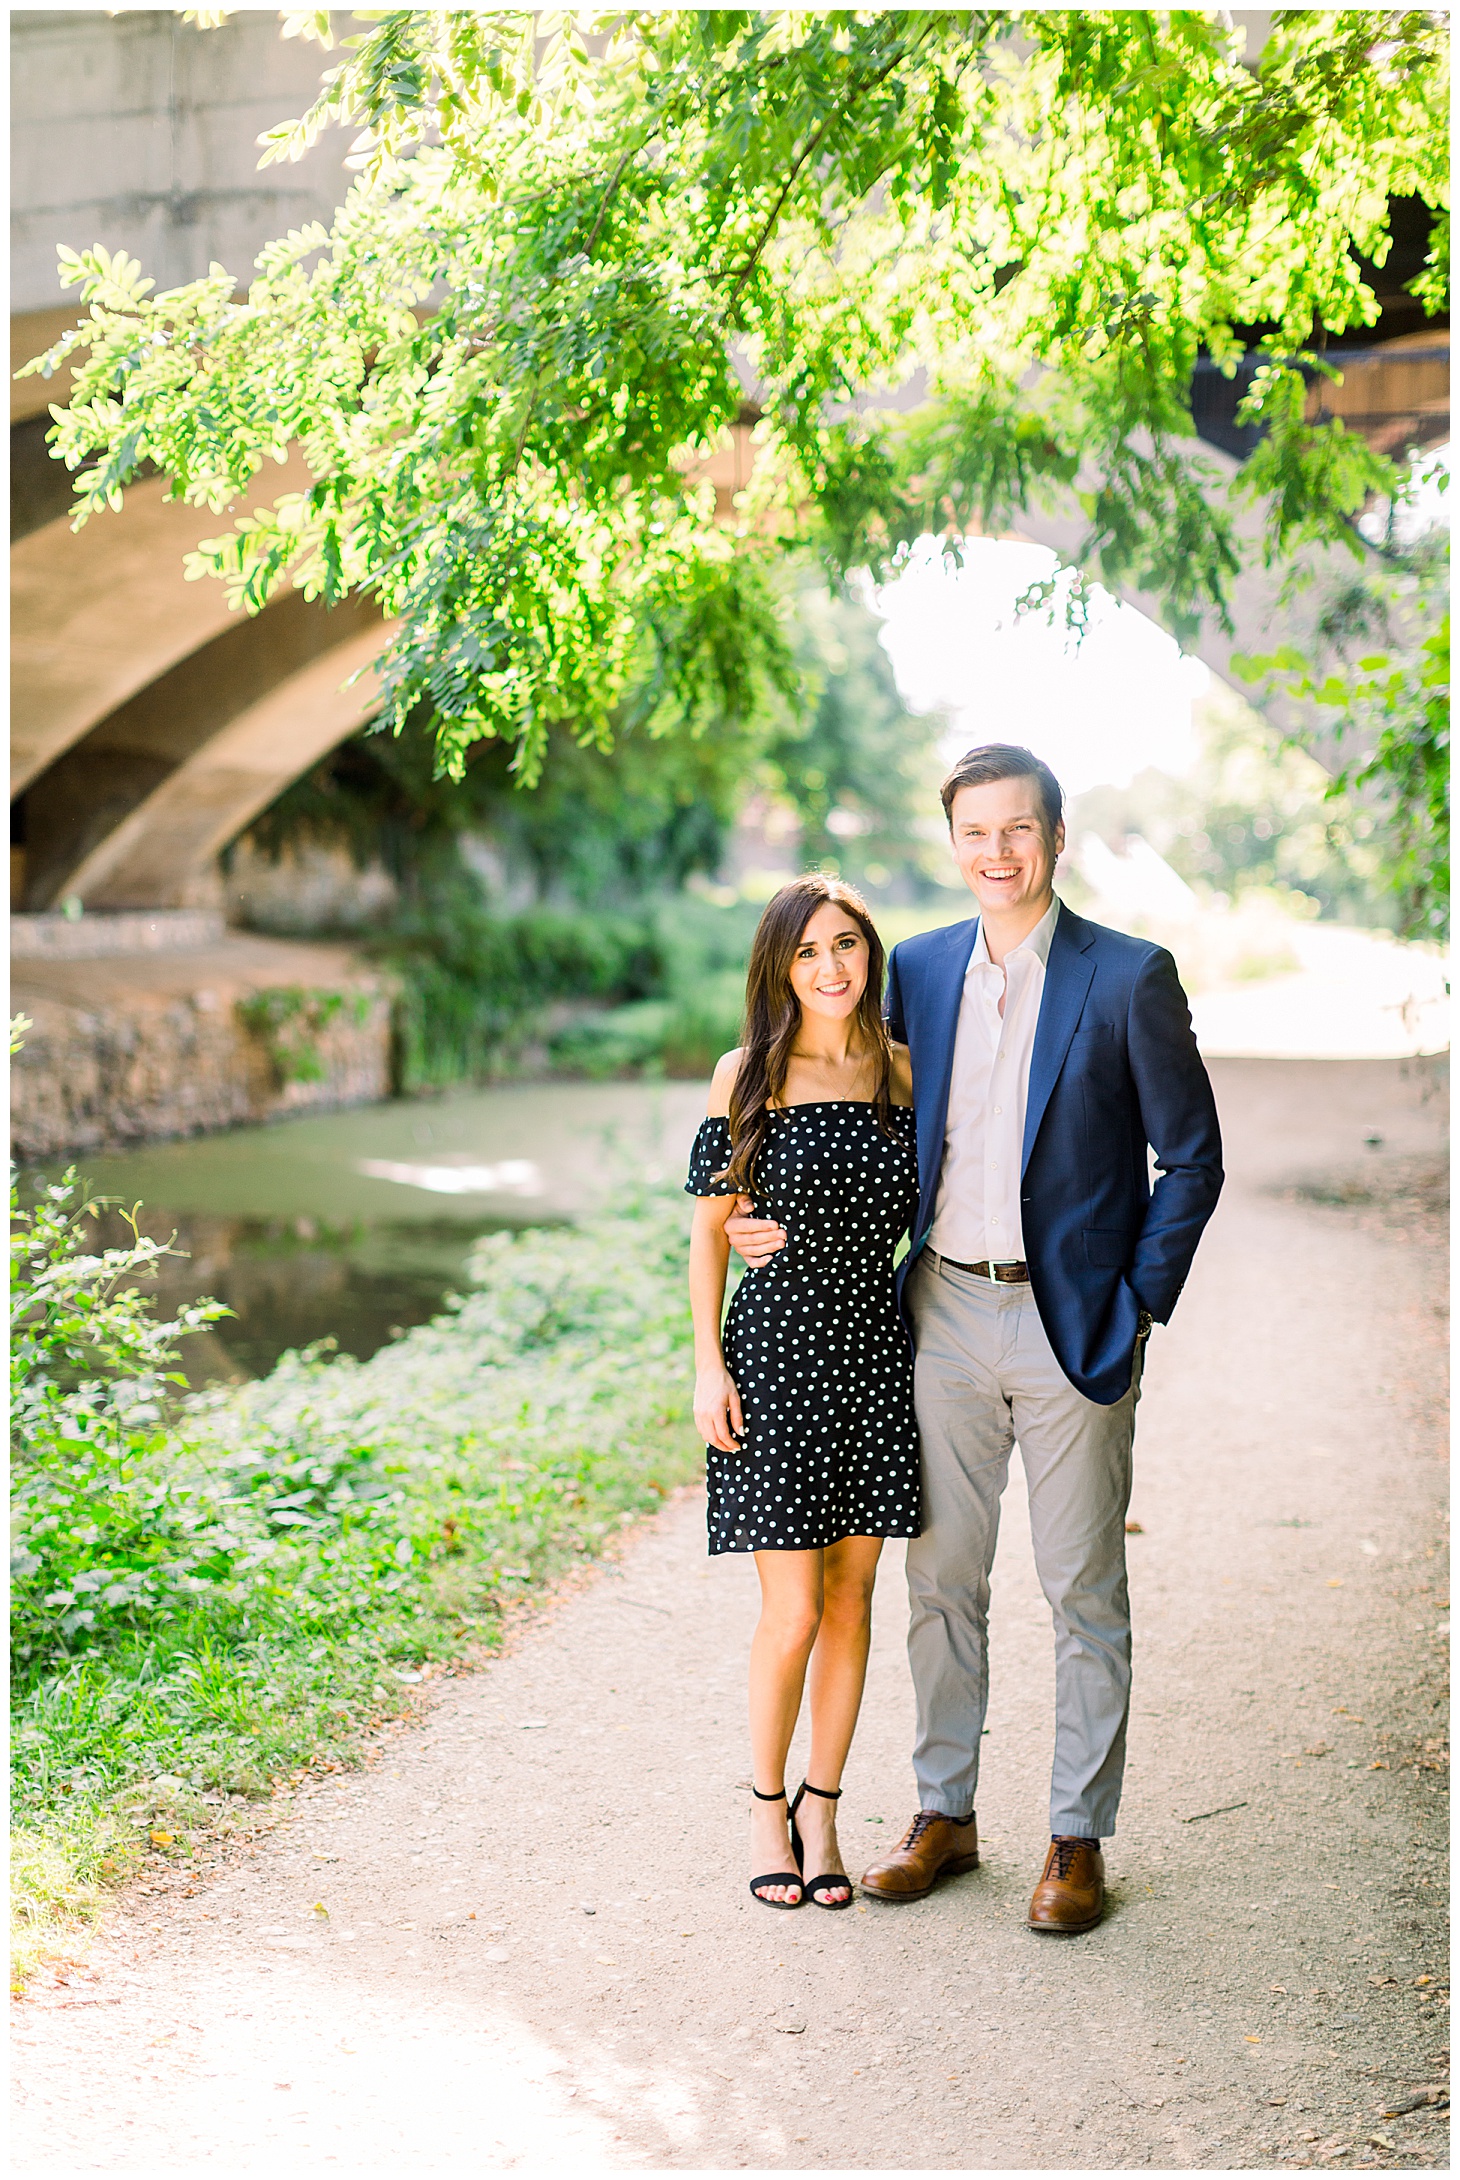 Sarah Bradshaw Photography, Preppy Morning Engagement Session with Golden Light